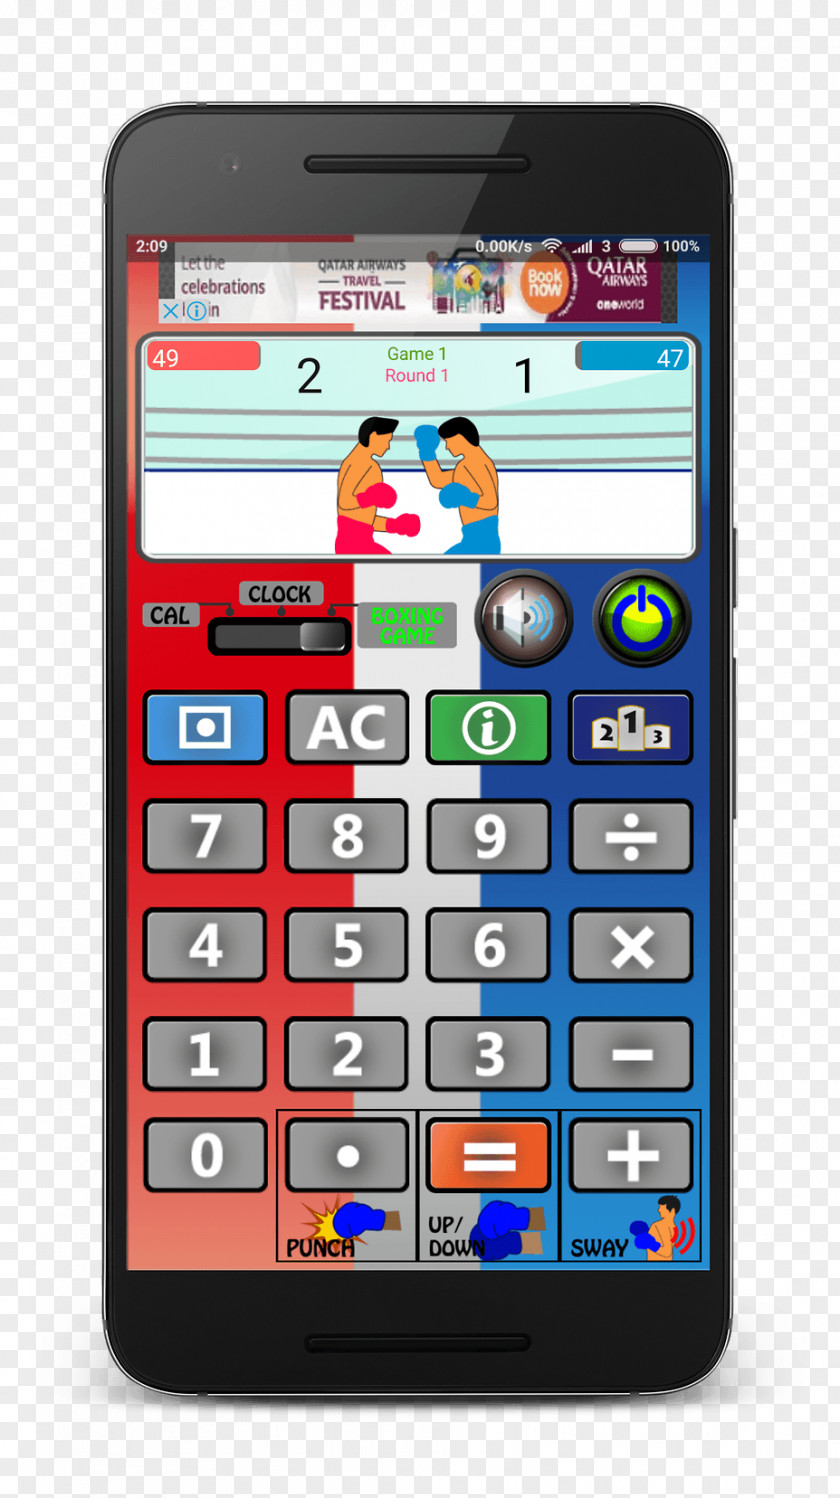 Boxing Player Feature Phone Smartphone Handheld Devices Numeric Keypads Calculator PNG